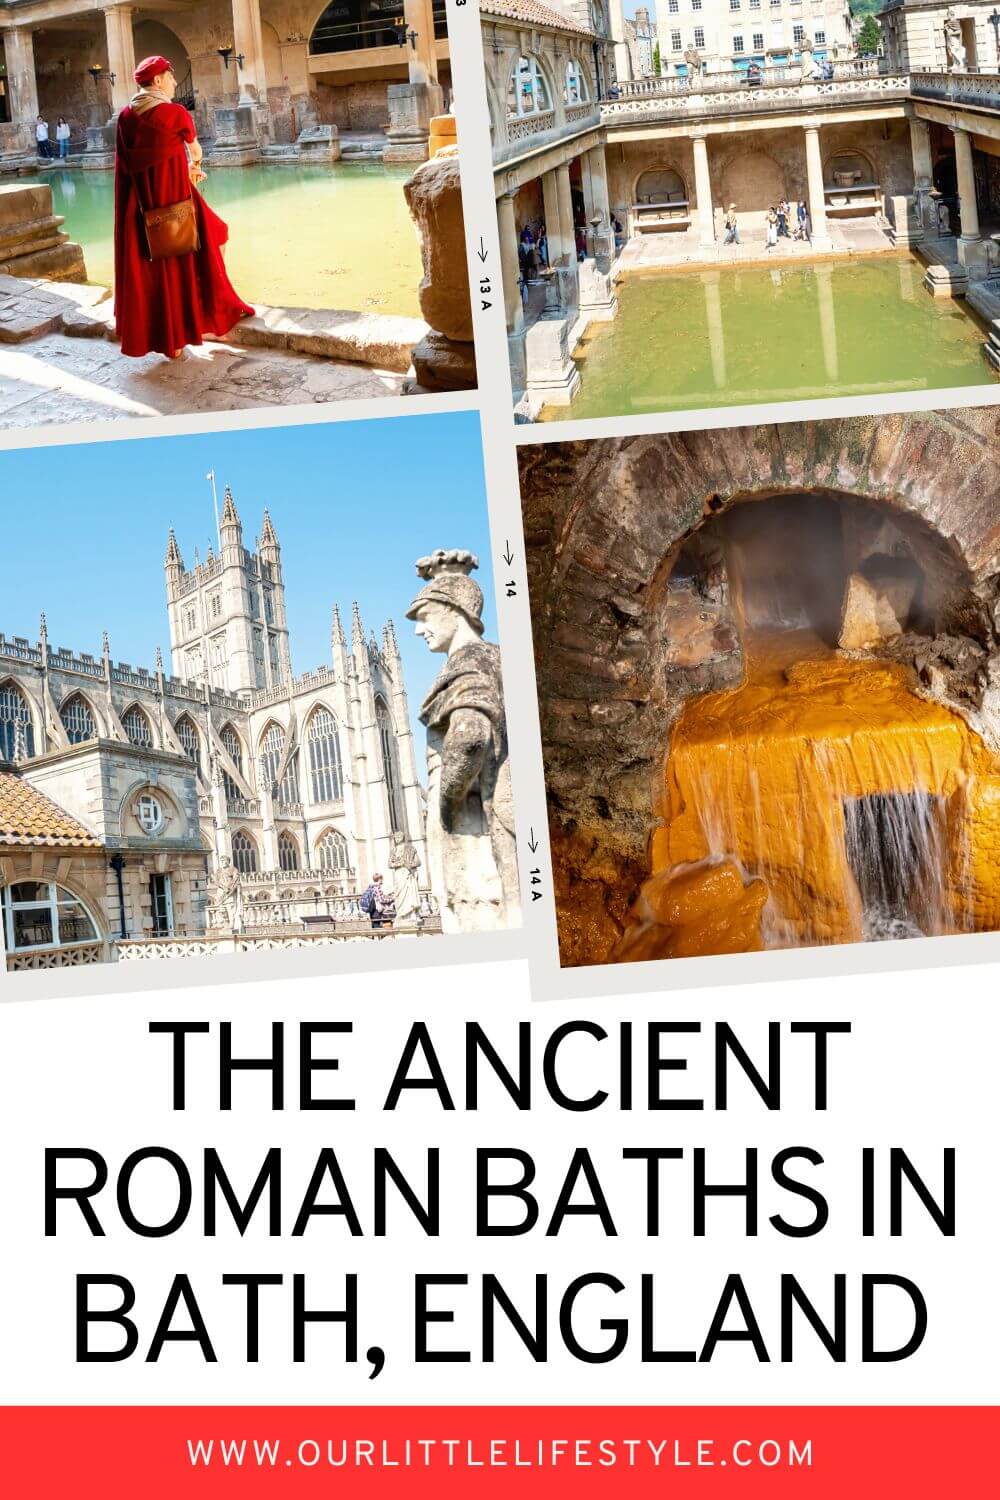 Visiting the Ancient Roman Baths in the United Kingdom